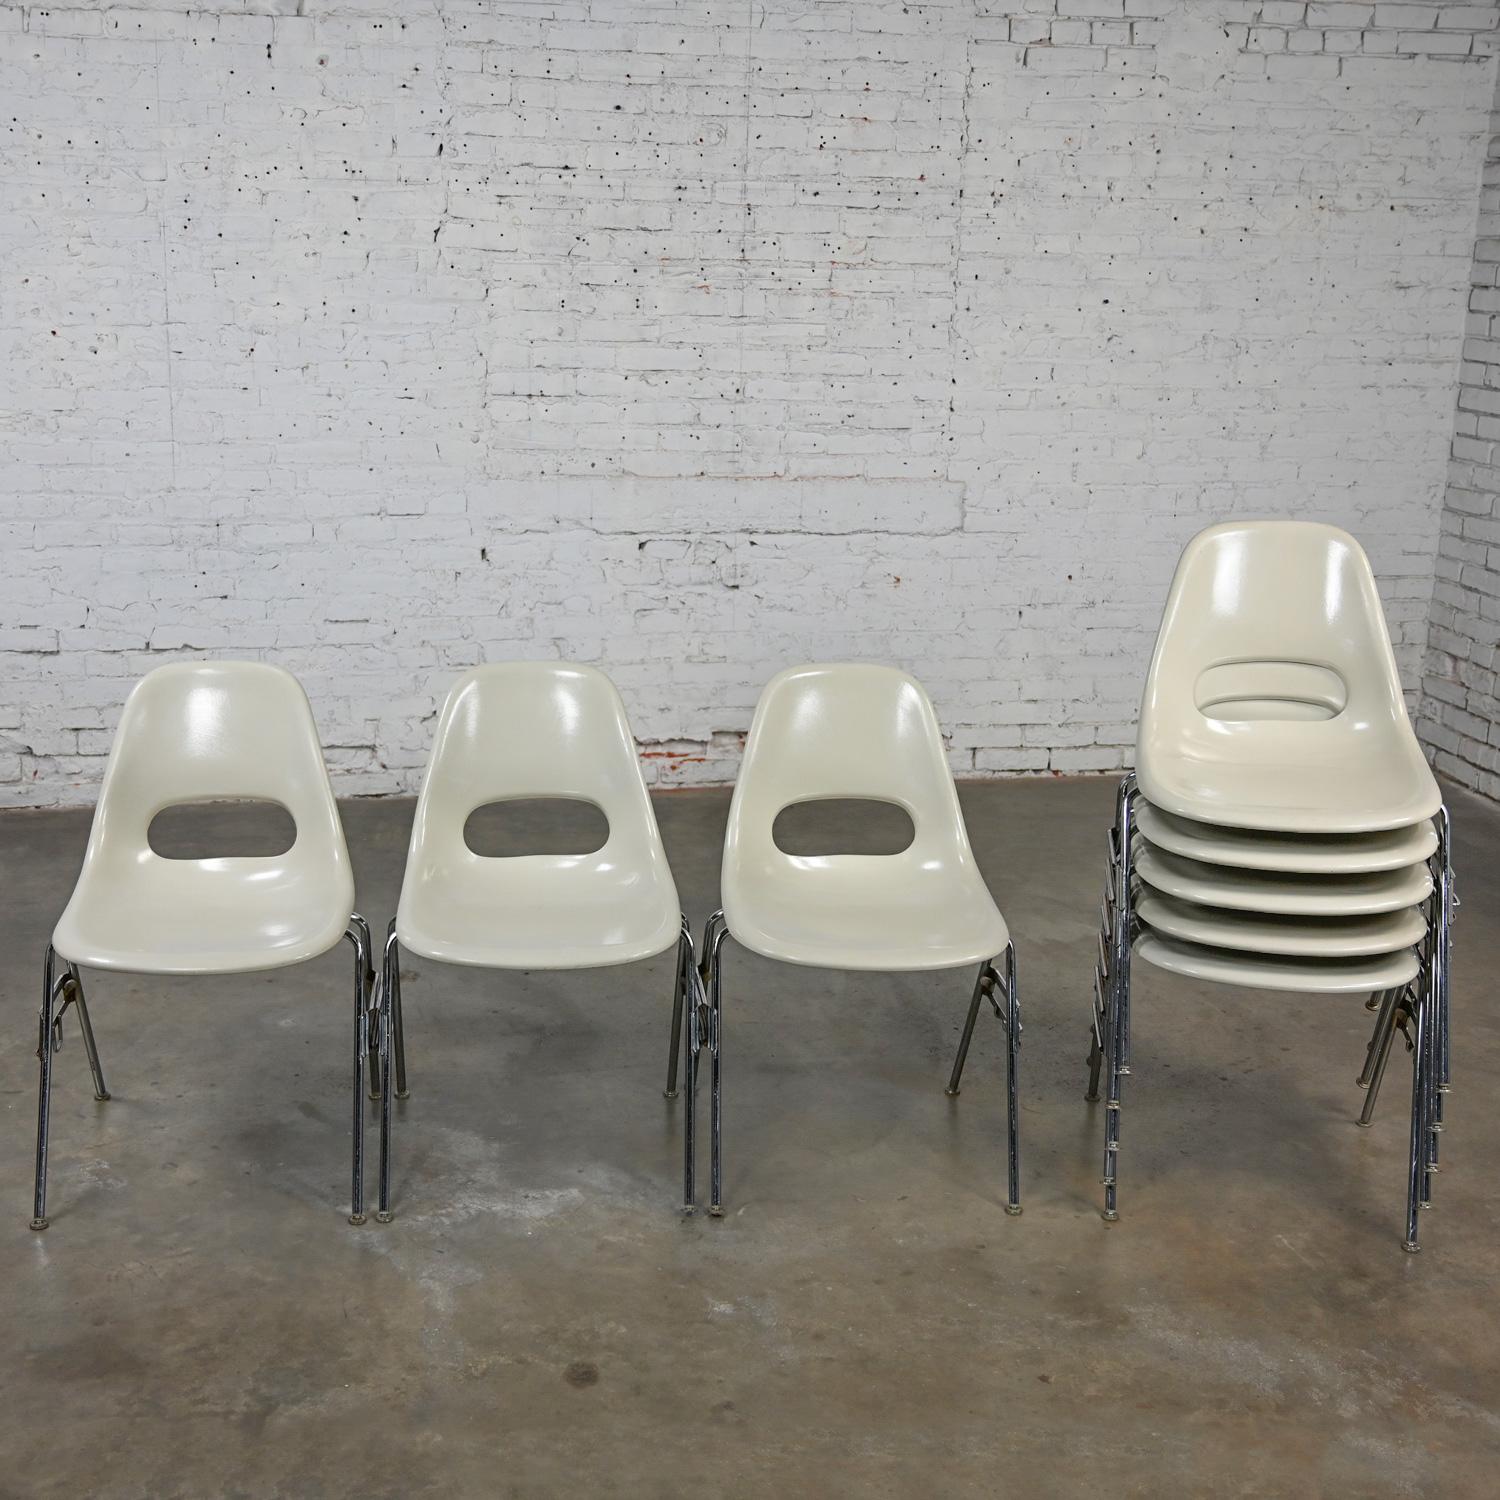 1960-70’s MCM Krueger International White Fiberglass & Chrome Stacking Chairs 8 In Good Condition For Sale In Topeka, KS